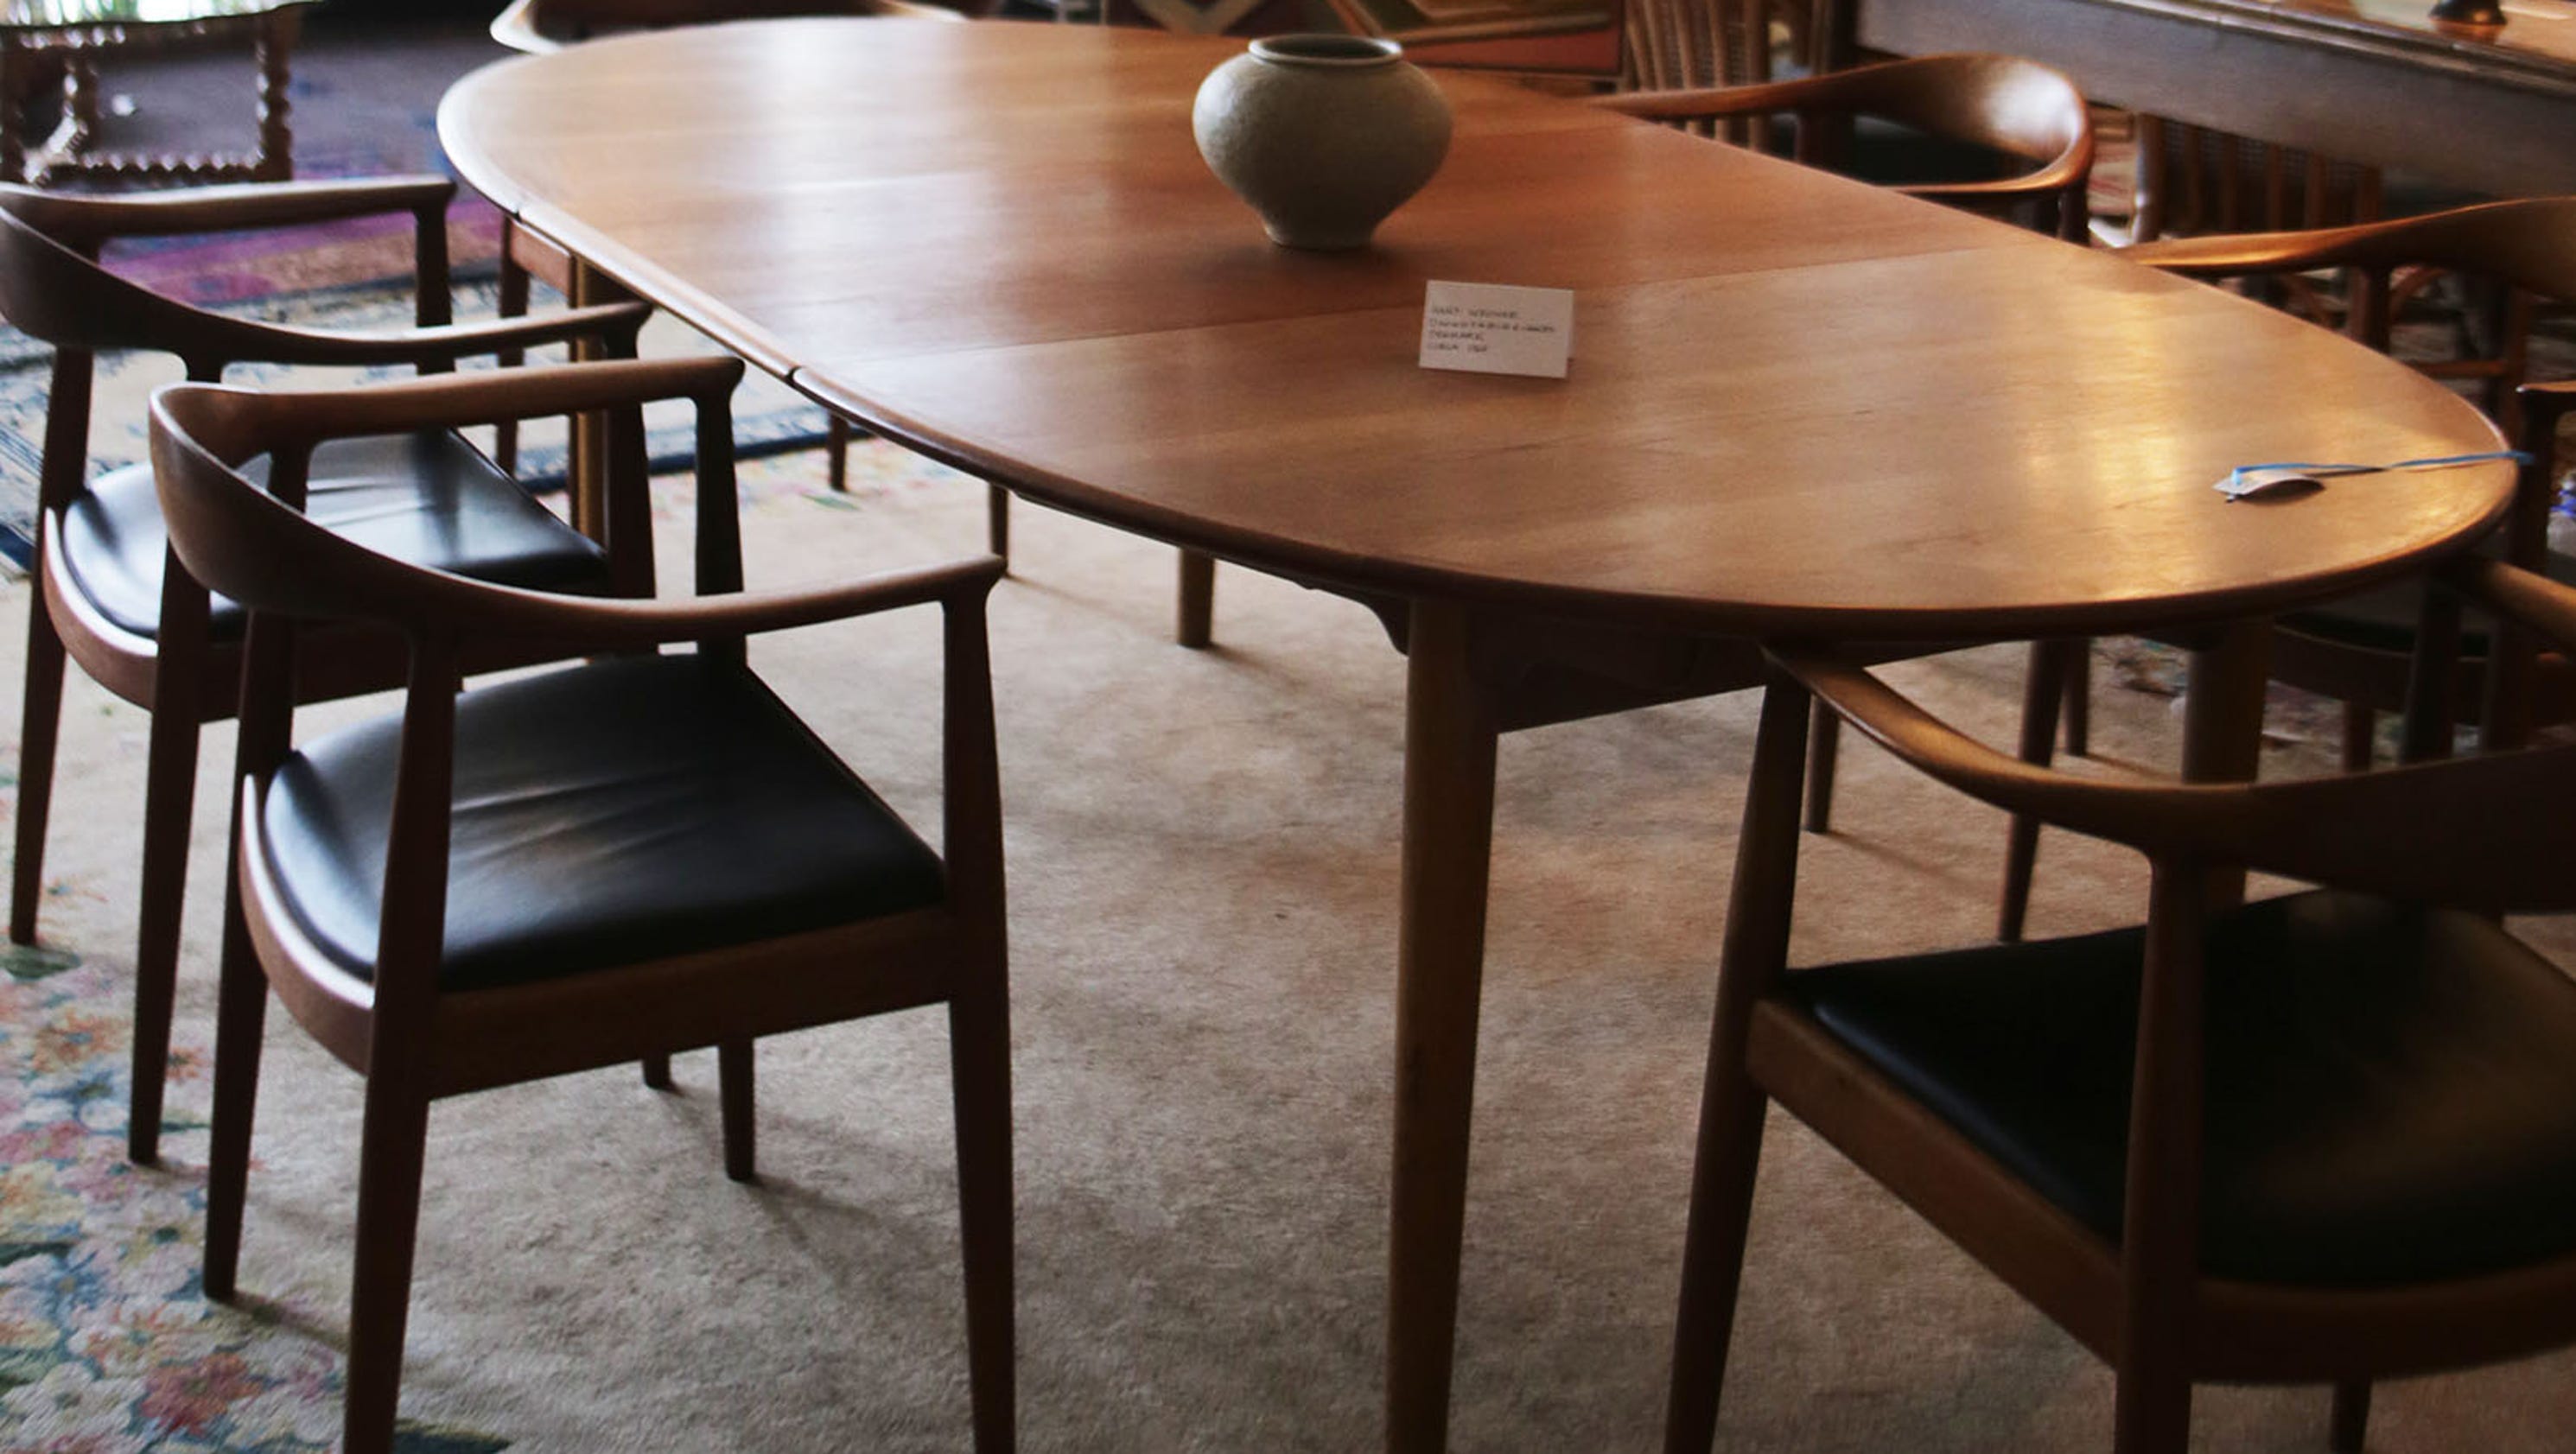 3 great places to find used furniture in metro Detroit